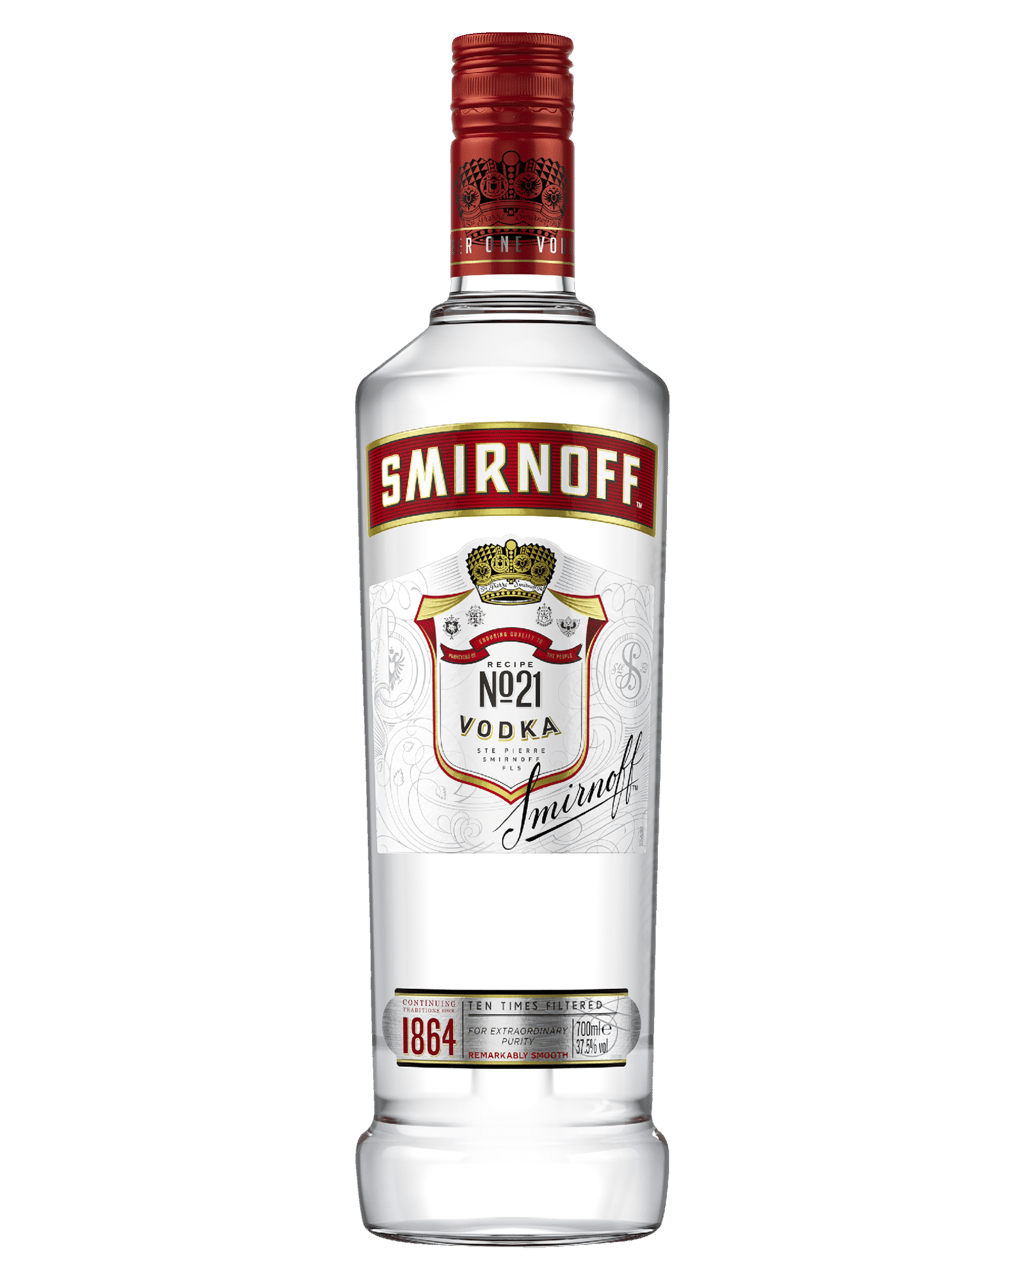 Buy Smirnoff Red Label Vodka 700ml Online or Near You in Australia [with Same Day Delivery* & Best Offers] - Murphy's